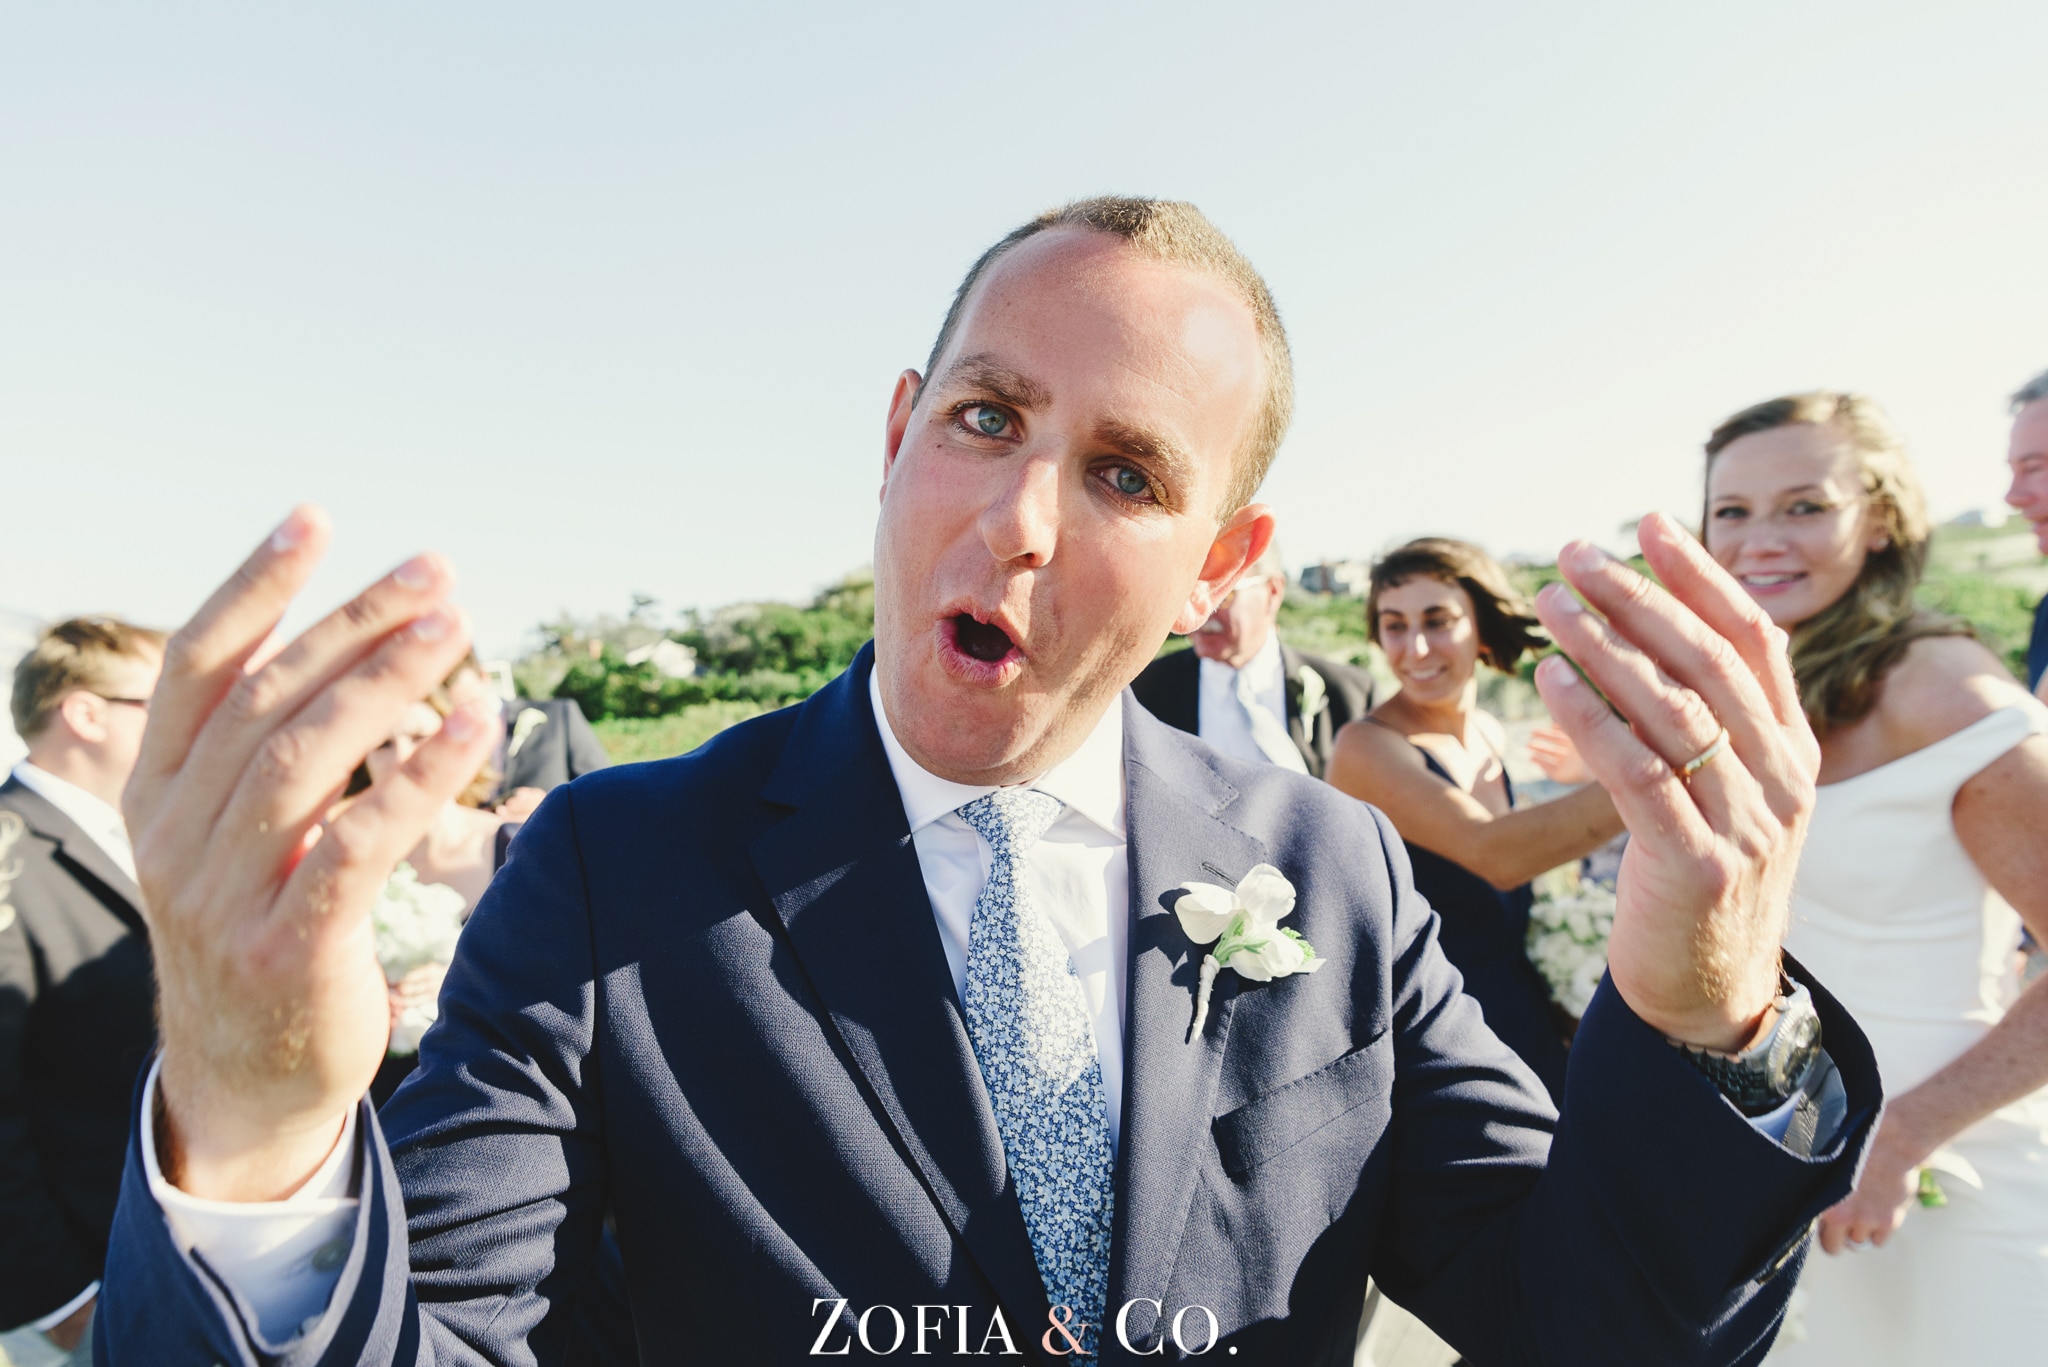 Nantucket wedding at the Wauwinet by Zofia and Co. with Barton and Gray boat, clear tent reception